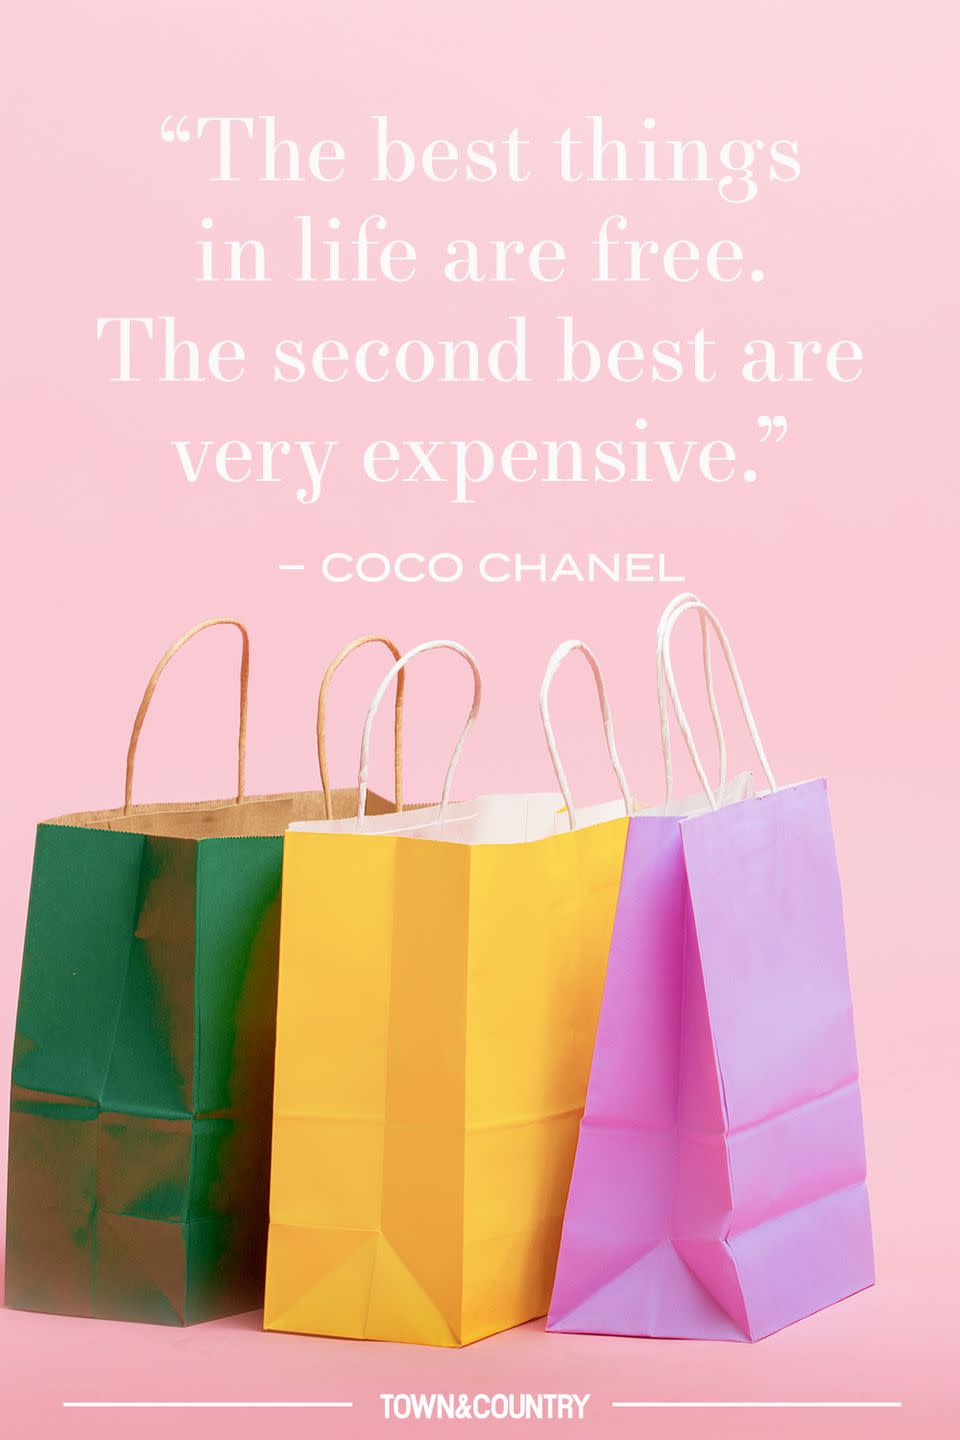 20 Quotes About Fashion to Inspire Your Style